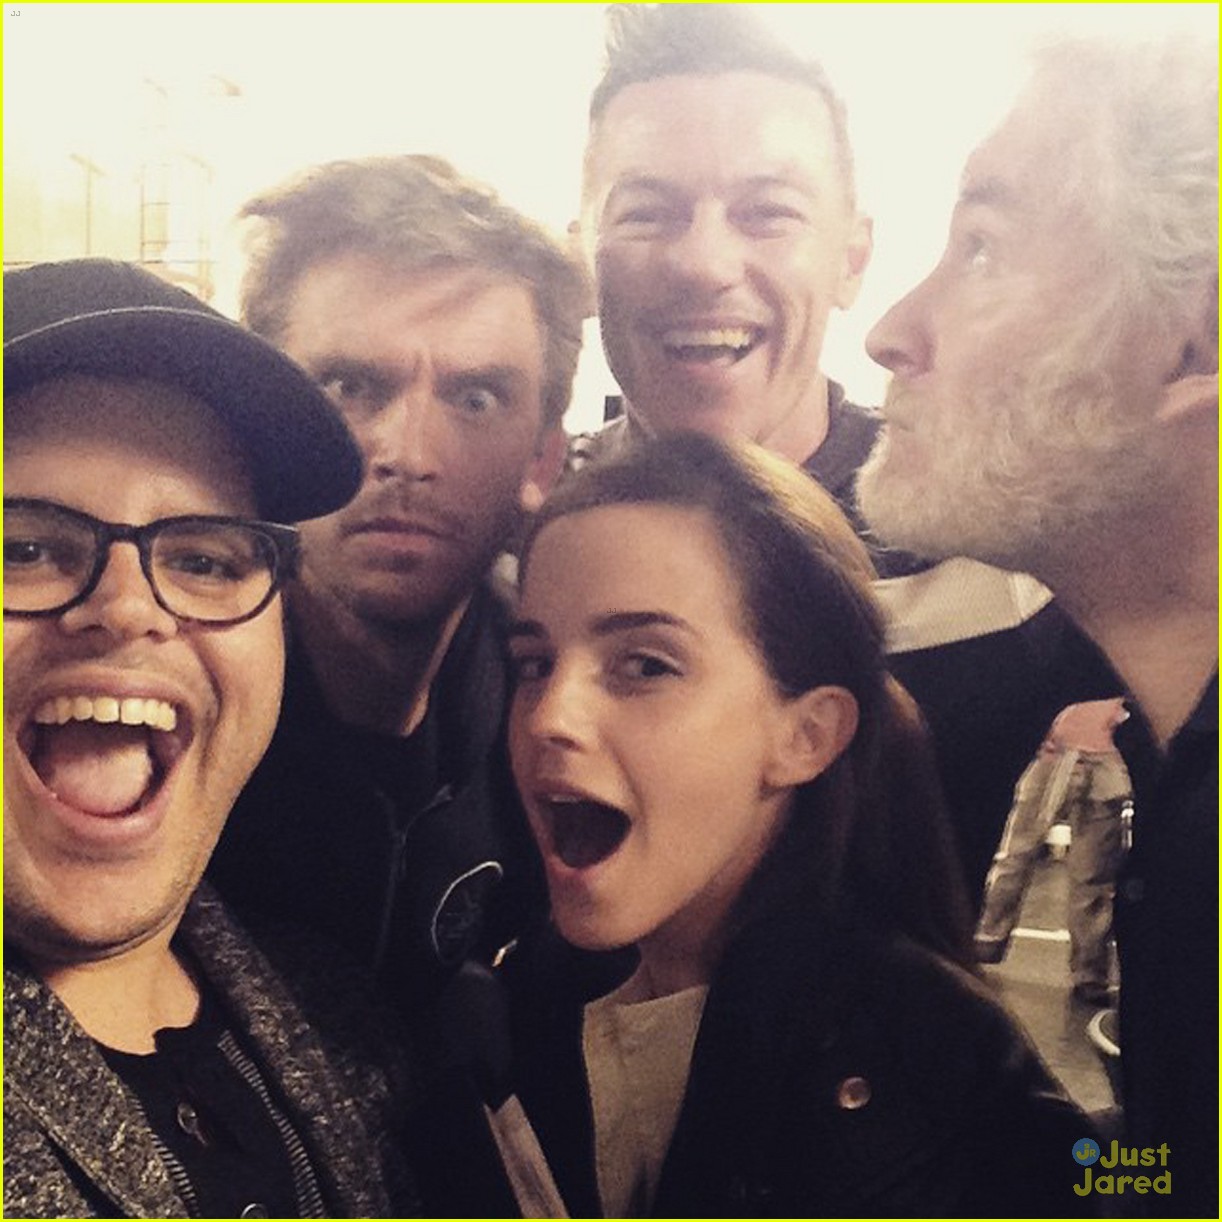 beauty and the beast cast takes photo 01